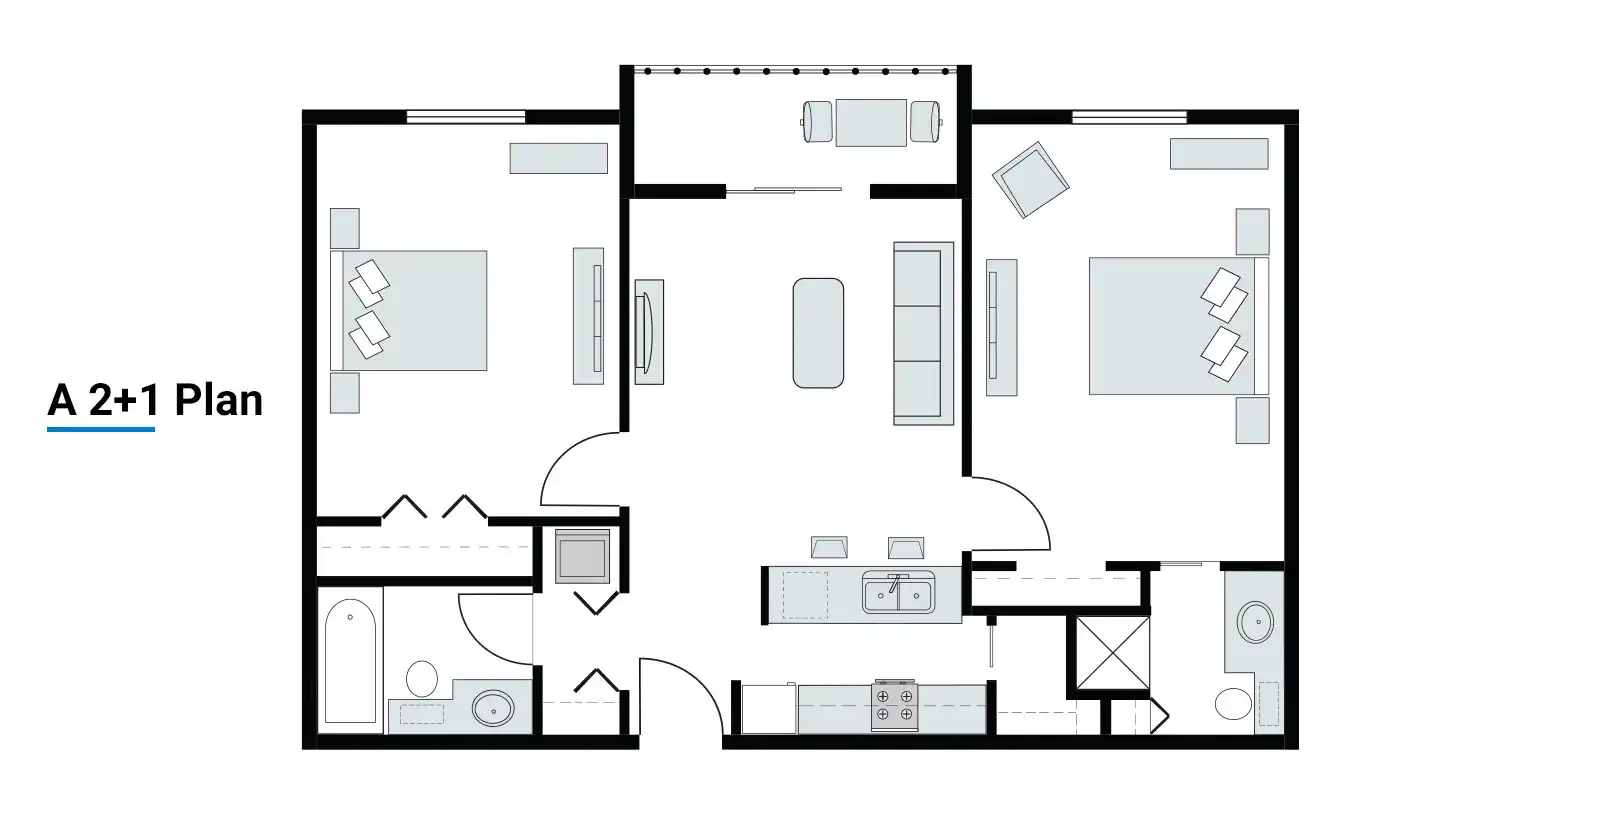 What is 2+1 apartment in turkey? A plan of 2+1 flat in Turkey with 2 bedrooms and one hall.